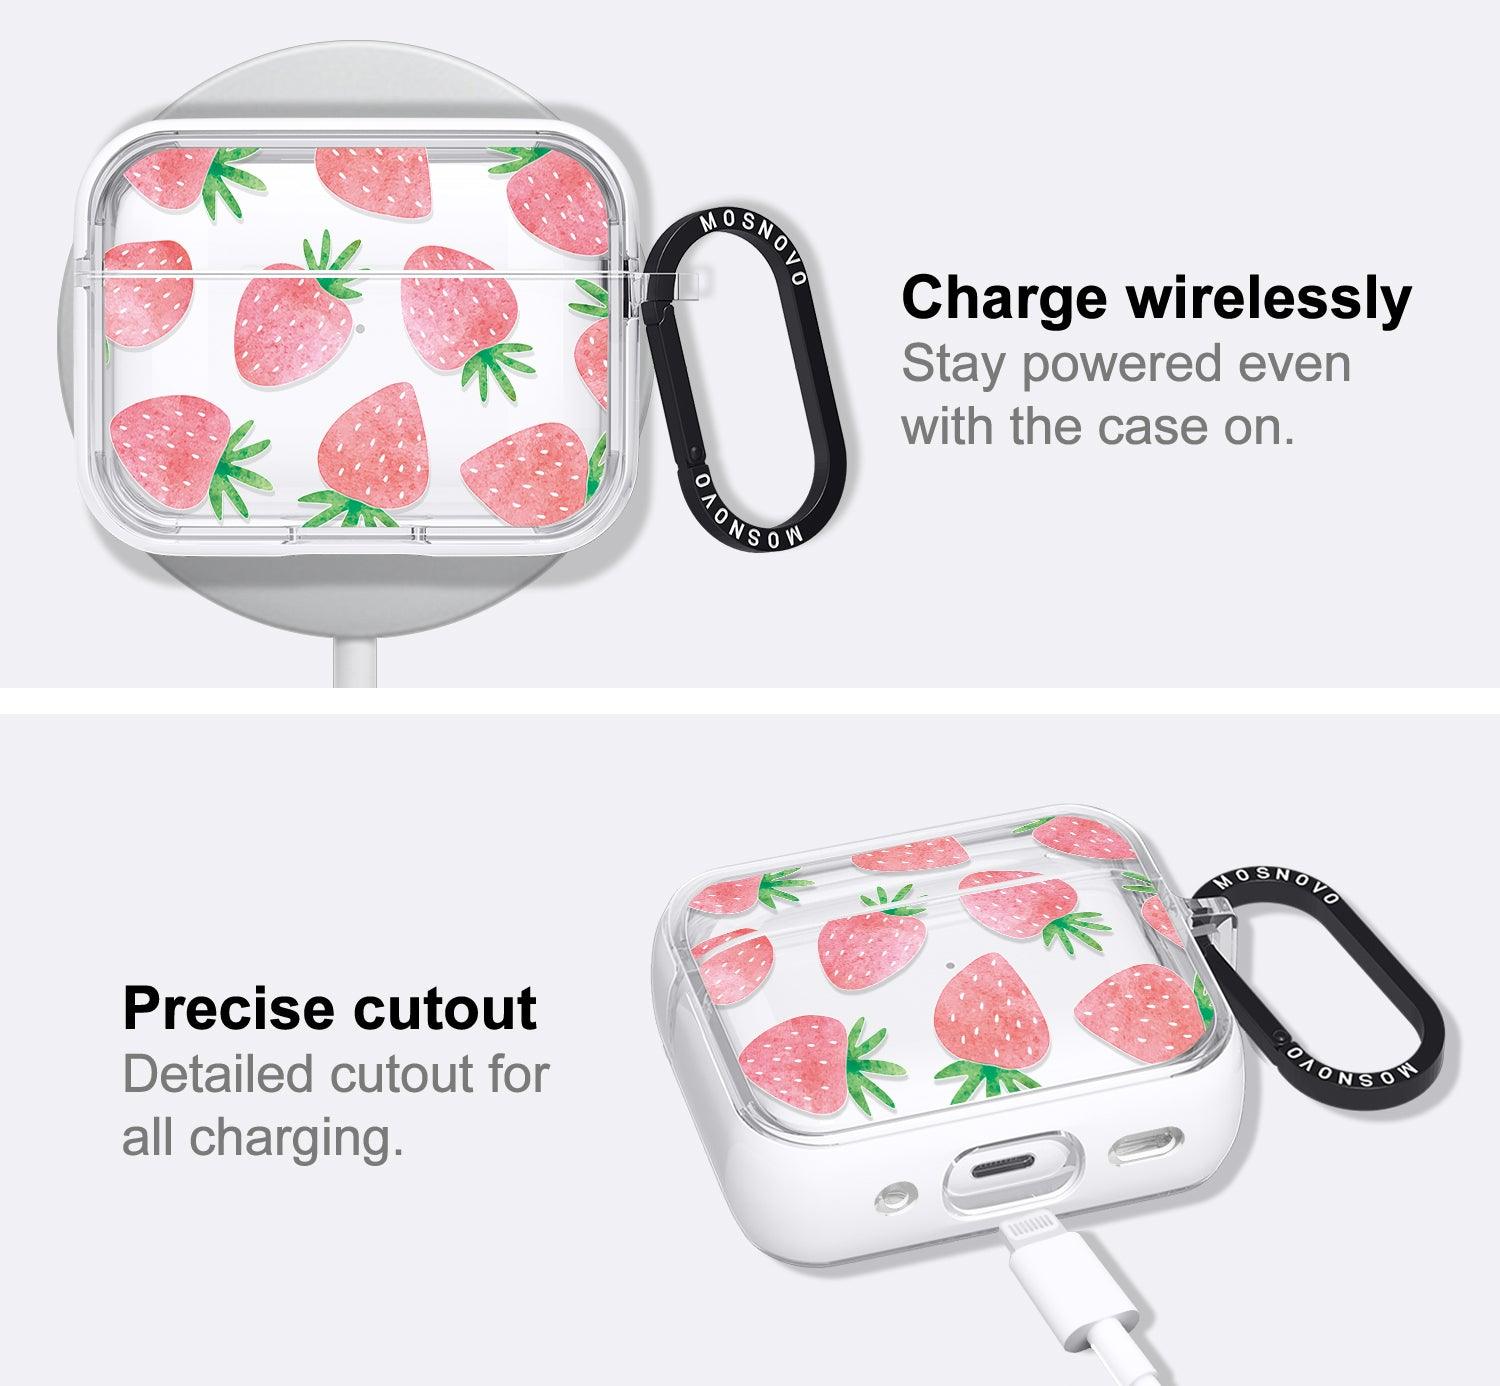 Strawberry AirPods Pro 2 Case (2nd Generation) - MOSNOVO